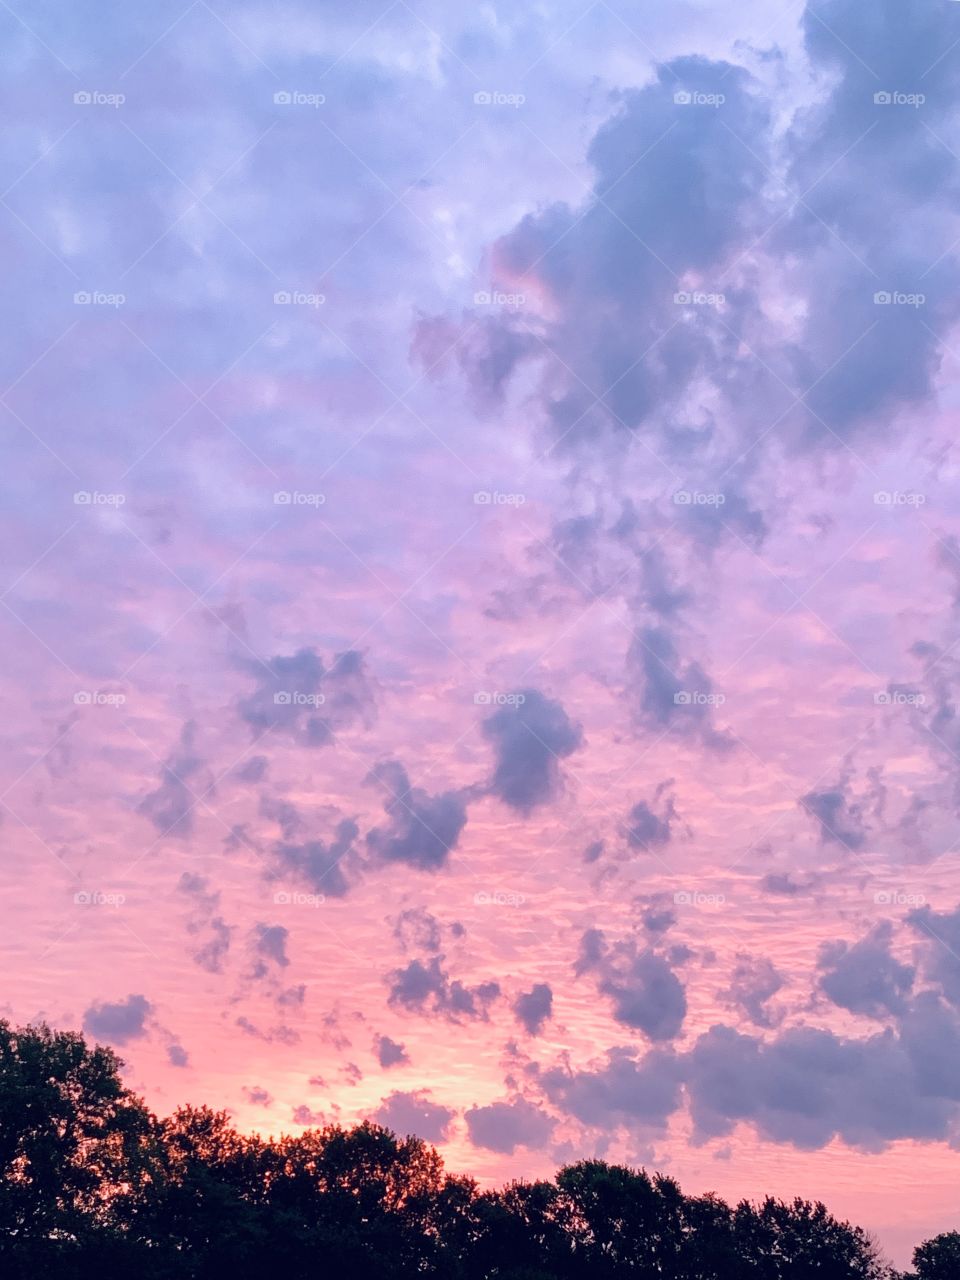 Small, puffy clouds in a beautiful lavender and pink sky over silhouetted trees at sunrise - portrait